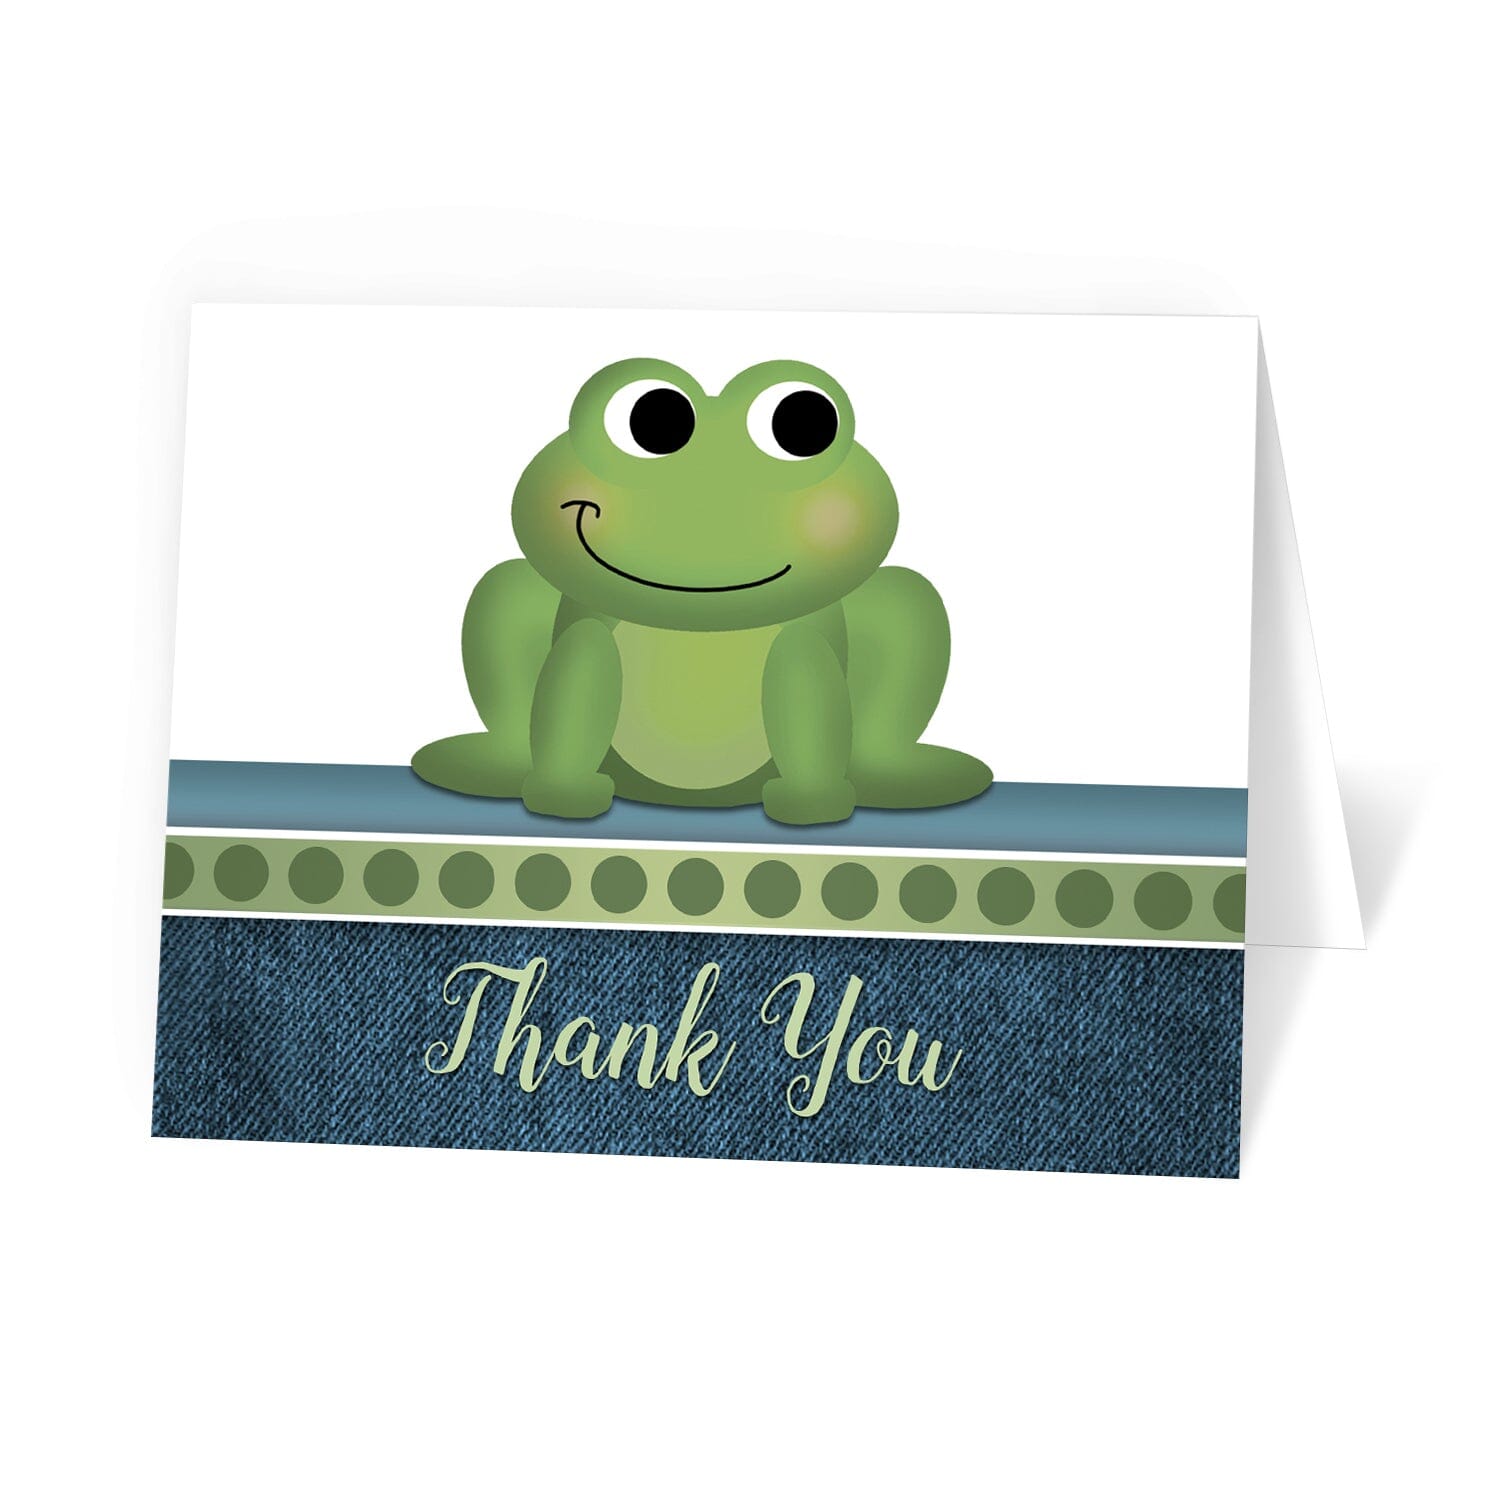 Cute Frog Green Rustic Denim Thank You Cards at Artistically Invited.